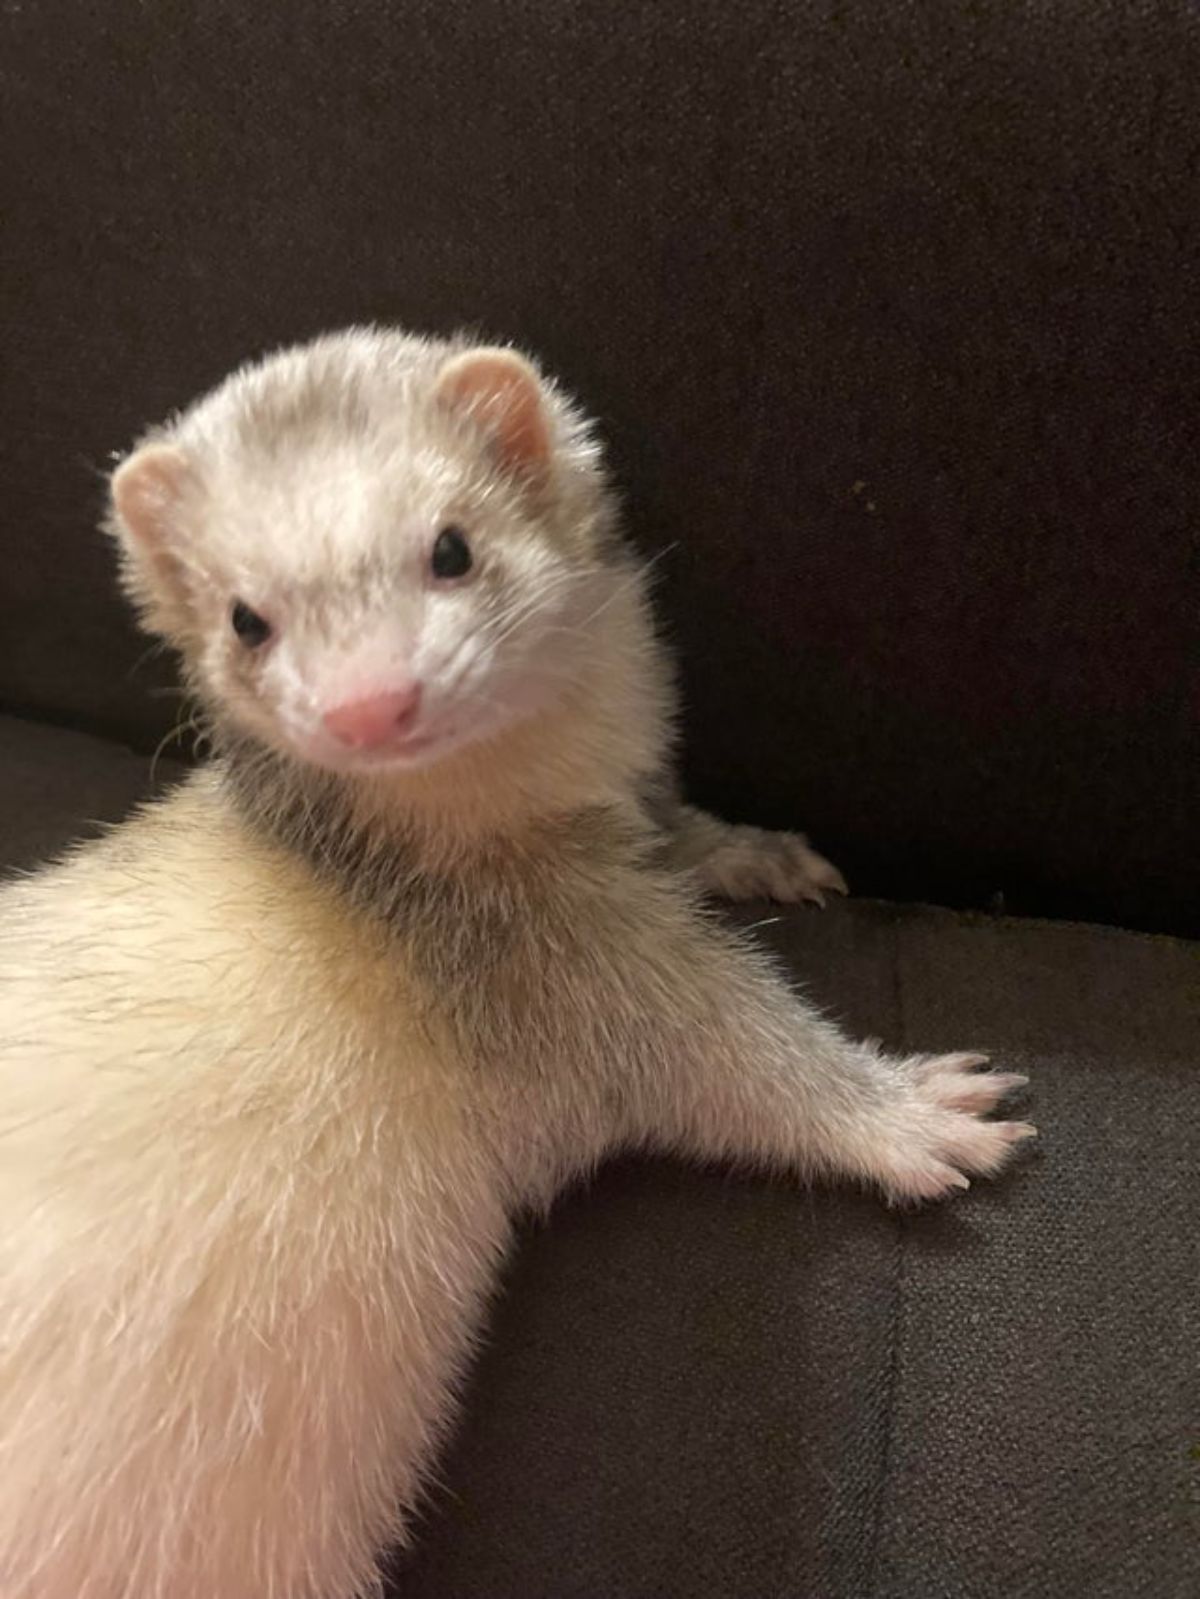 black and white ferret on brown surface looking back looking a little grumpy